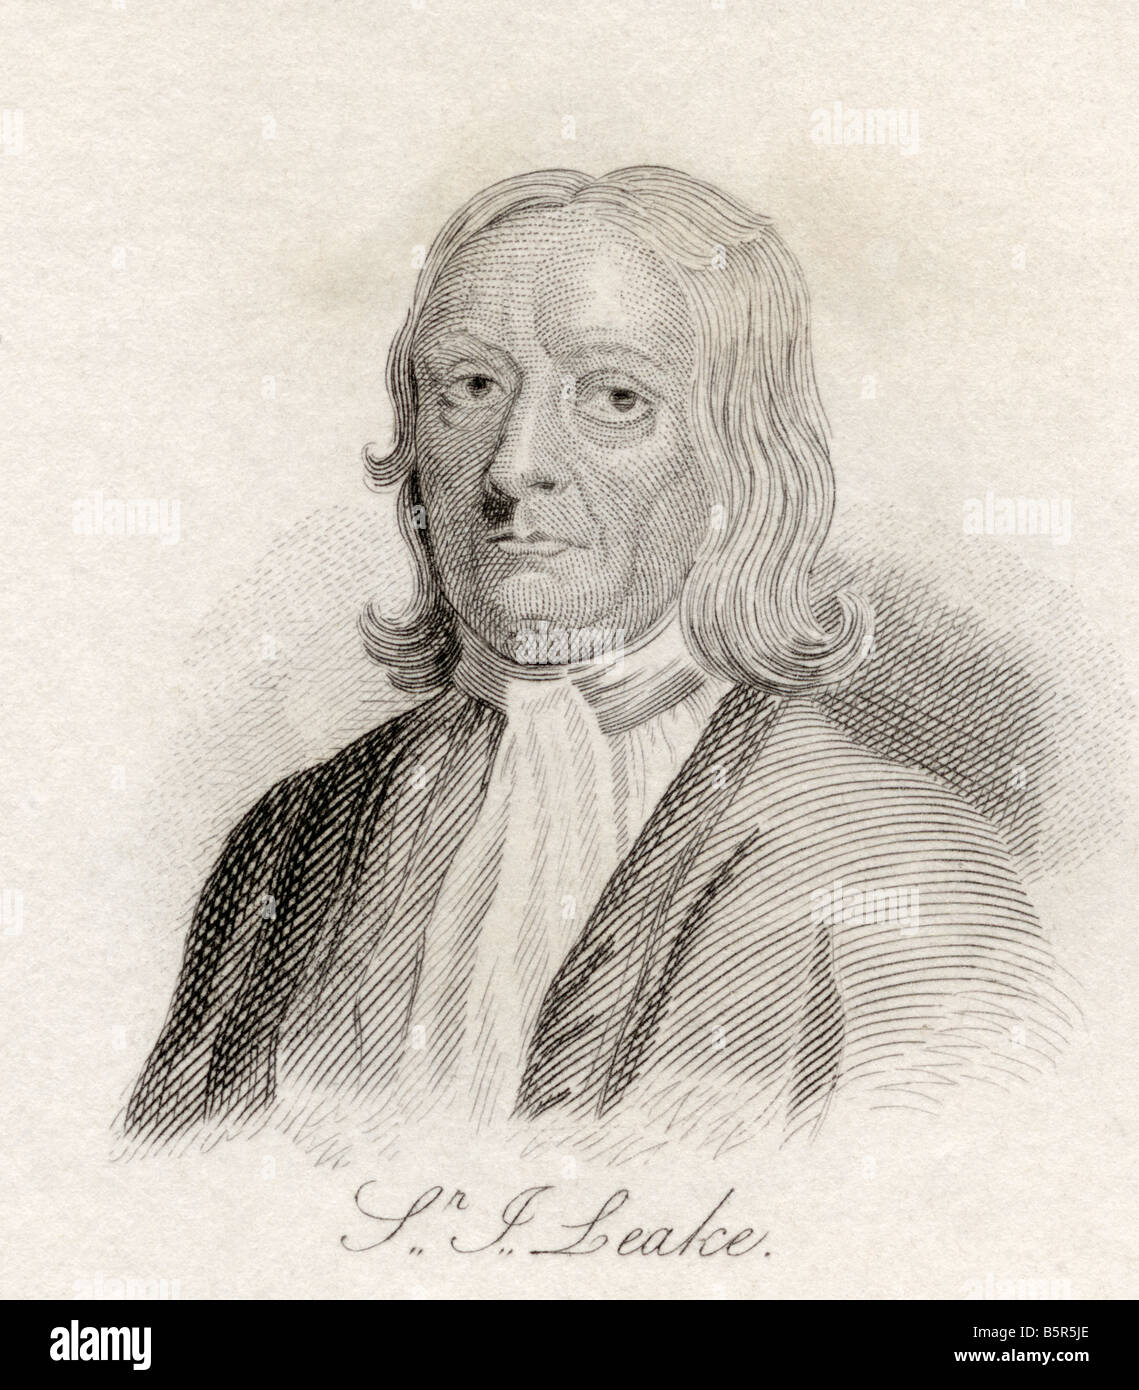 Sir John Leake, 1656 - 1720. English Admiral.  From the book Crabb's Historical Dictionary, published 1825. Stock Photo